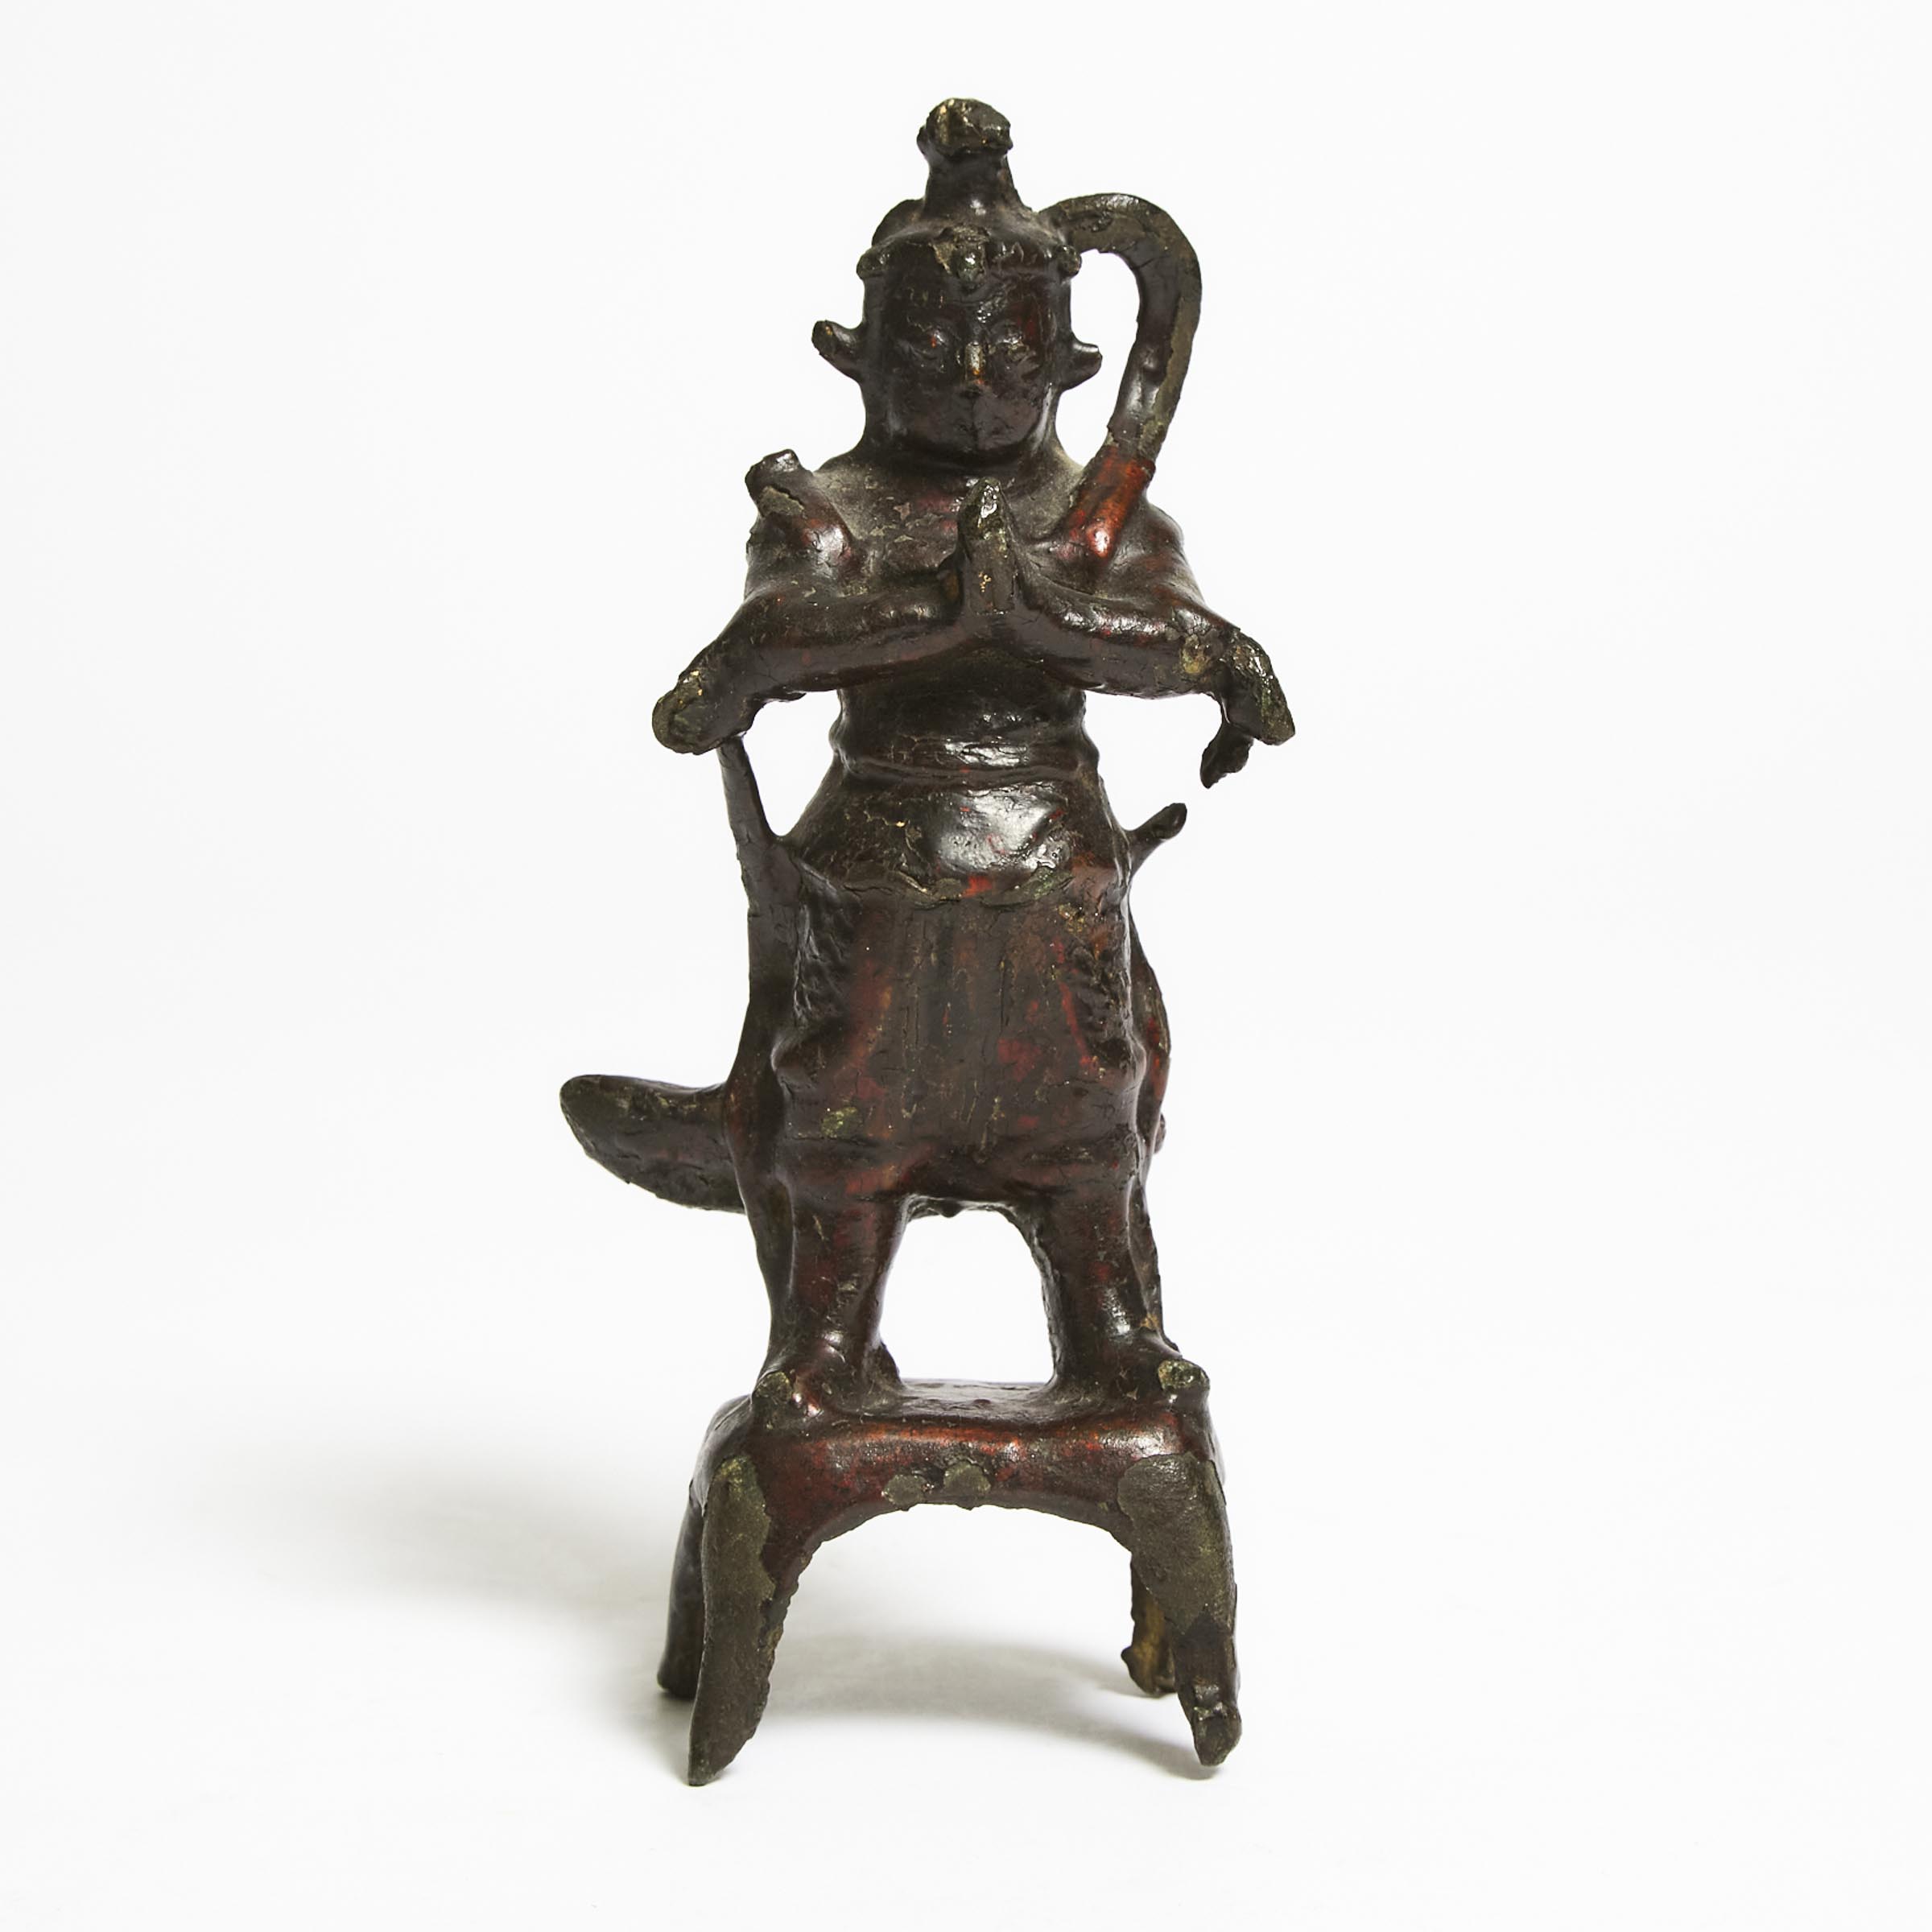 A Red and Black Lacquered Bronze Figure of Weituo (Skanda), 17th Century